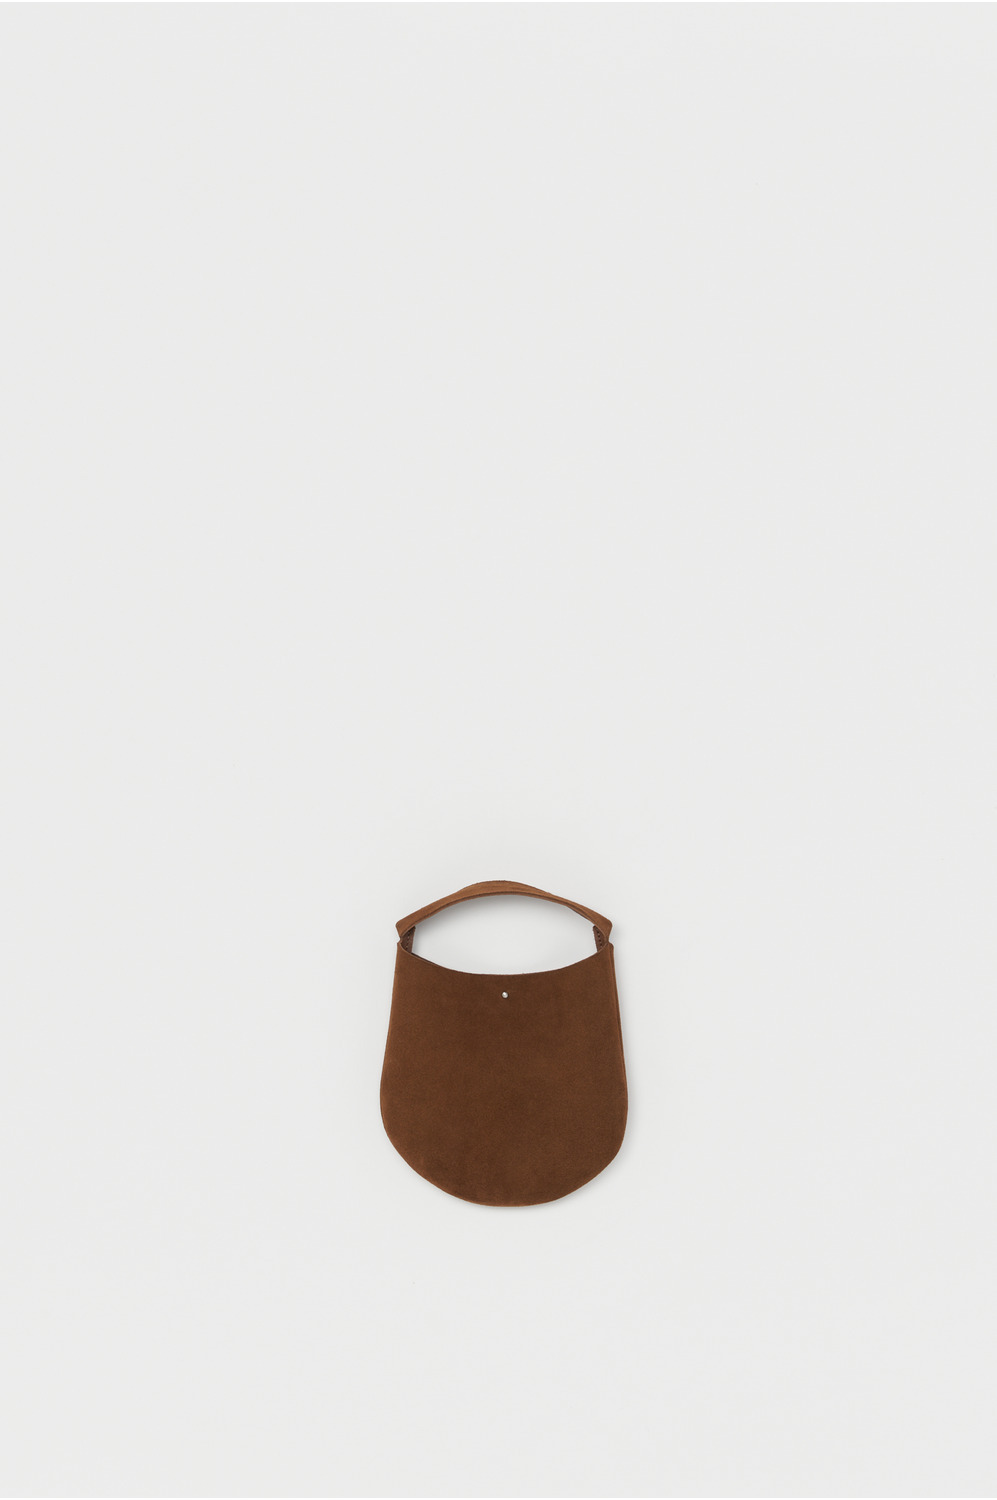 one piece bag small 詳細画像 brown 1